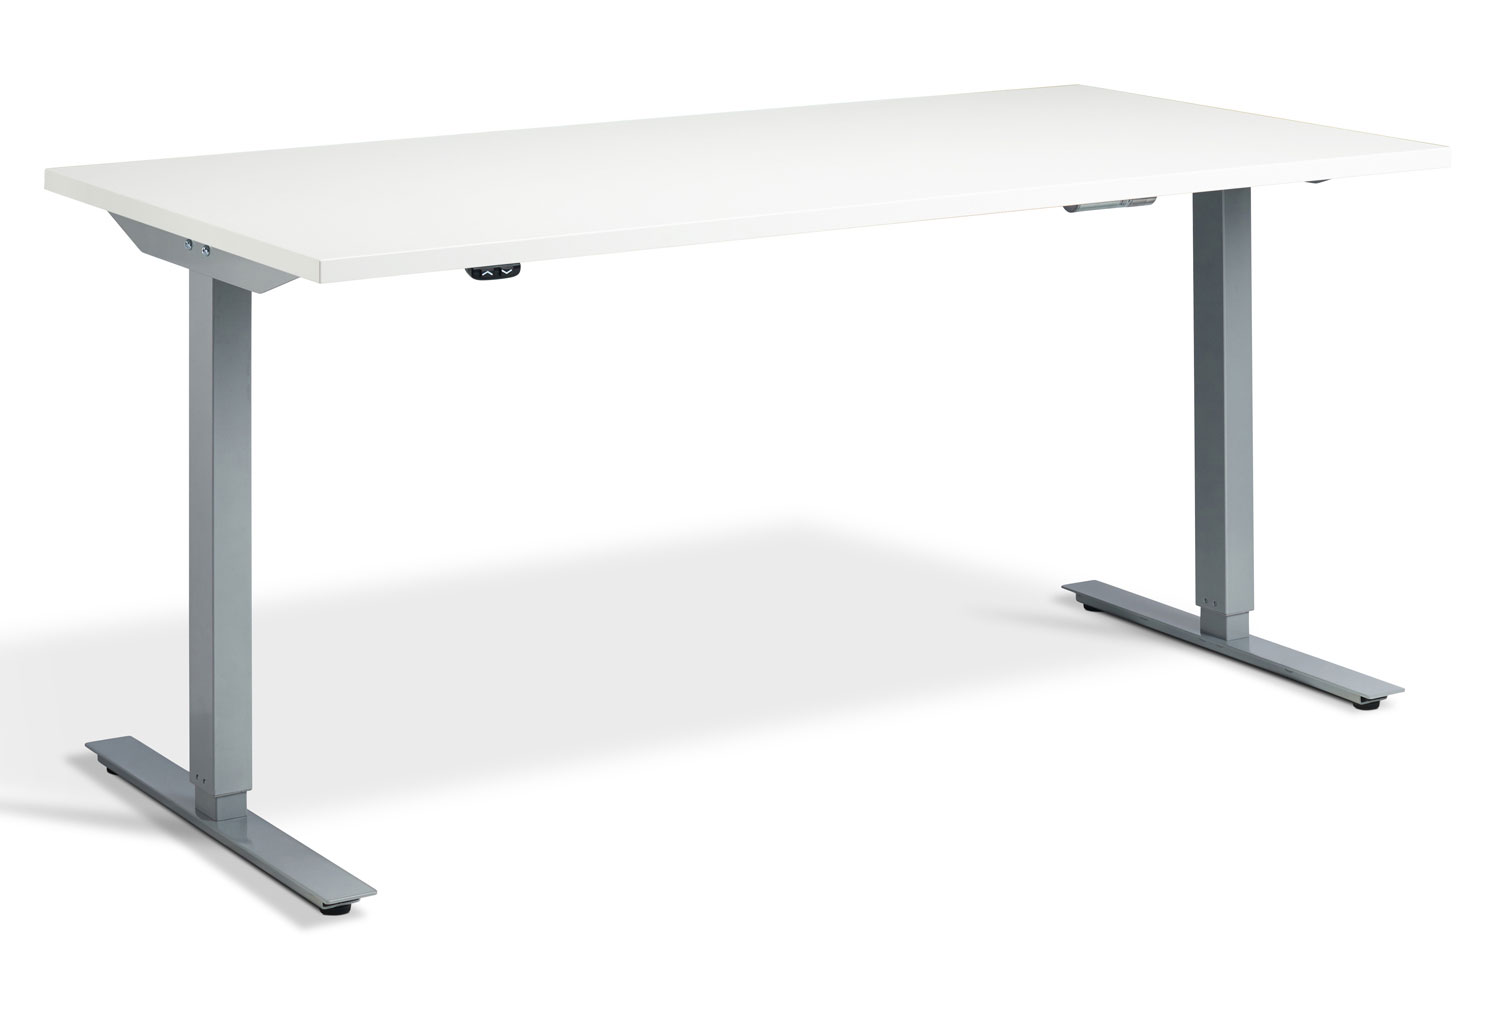 Calgary Dual Motor Height Adjustable Office Desk, 120wx80dx70-120h (cm), Silver Frame, White, Express Delivery